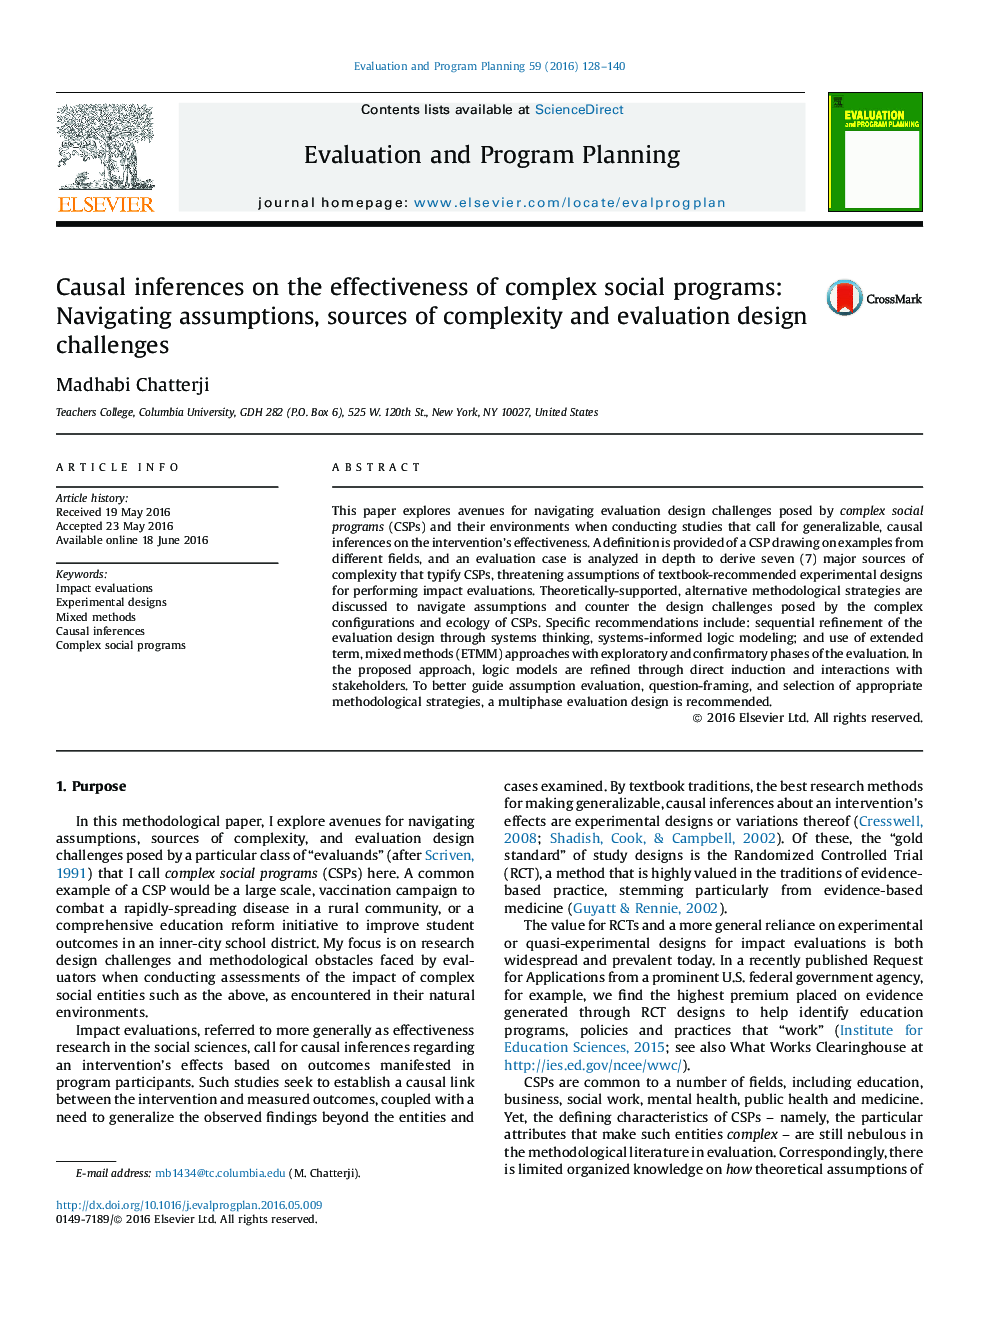 Causal inferences on the effectiveness of complex social programs: Navigating assumptions, sources of complexity and evaluation design challenges